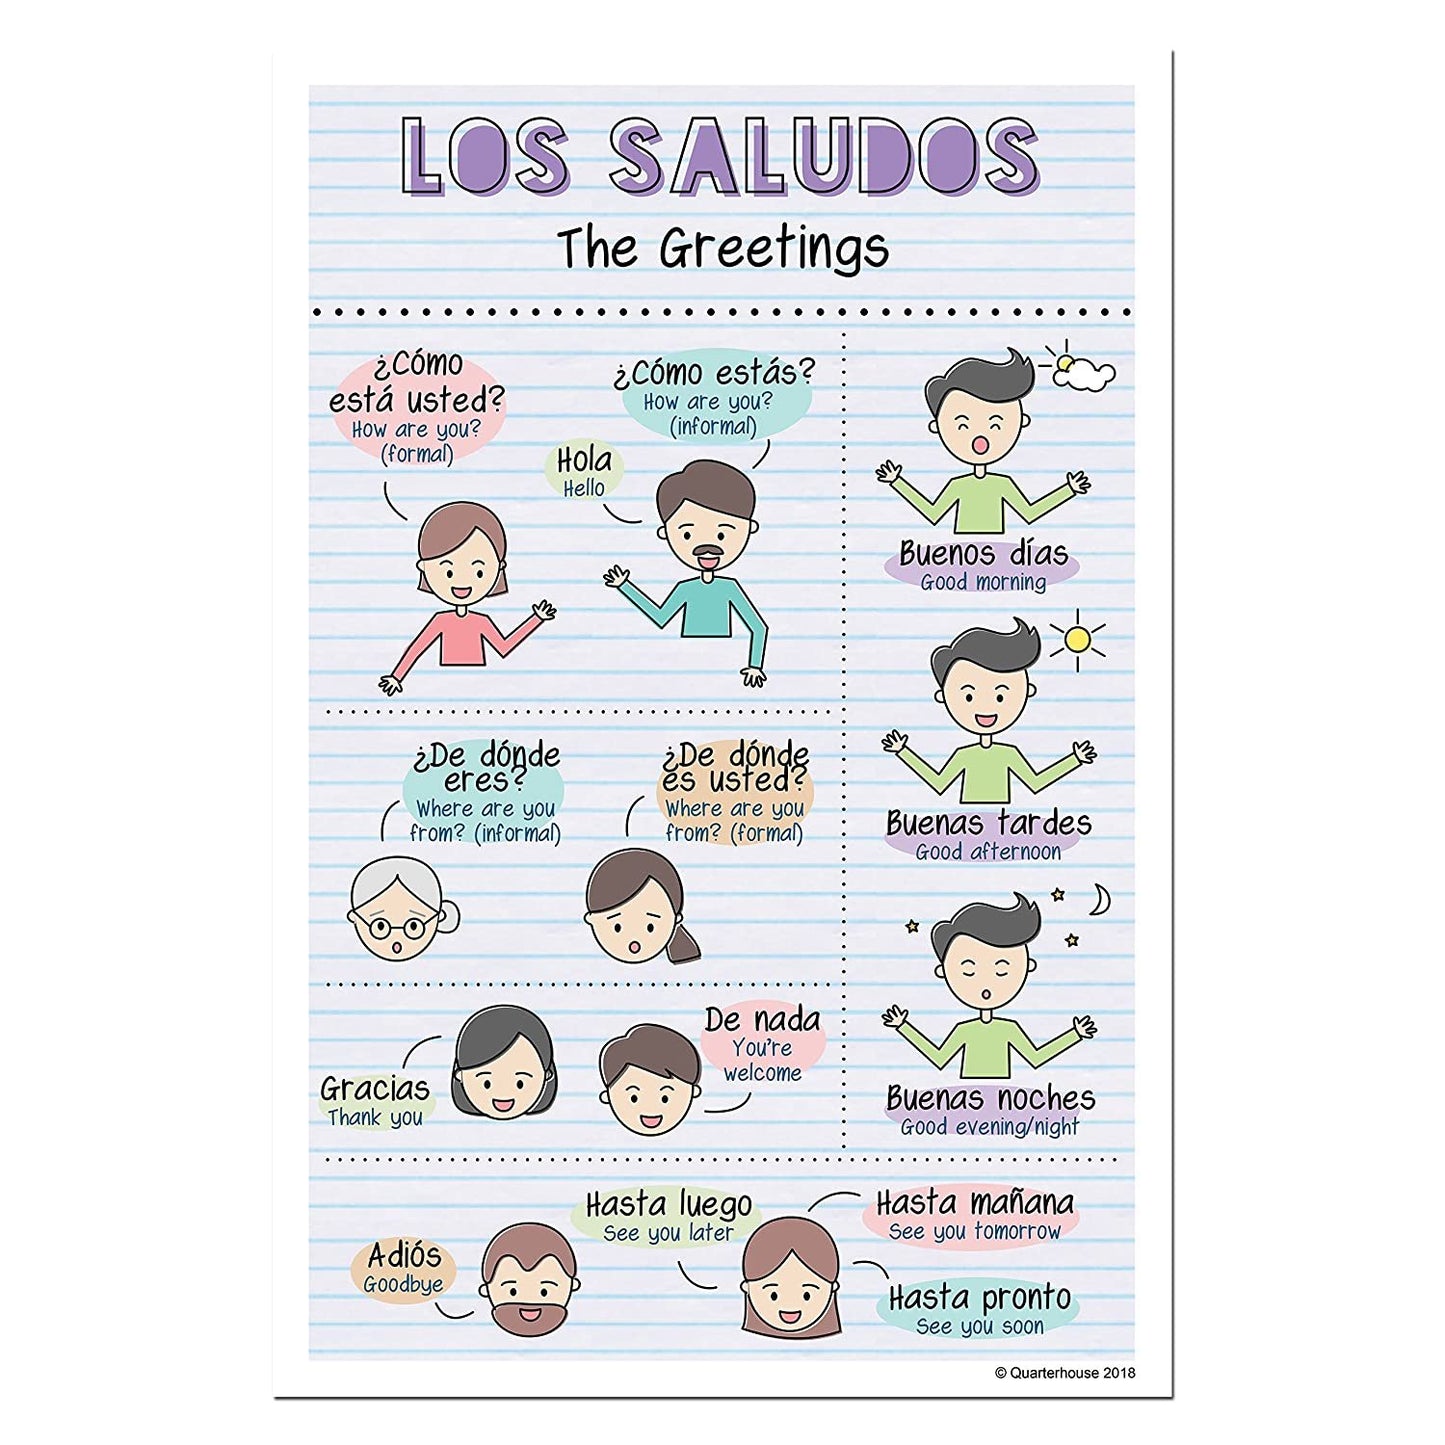 Quarterhouse Spanish Verbs & Beginner Vocabulary (Set H) Poster Set, Spanish Classroom Learning Materials for K-12 Students and Teachers, Set of 11, 12 x 18 Inches, Extra Durable